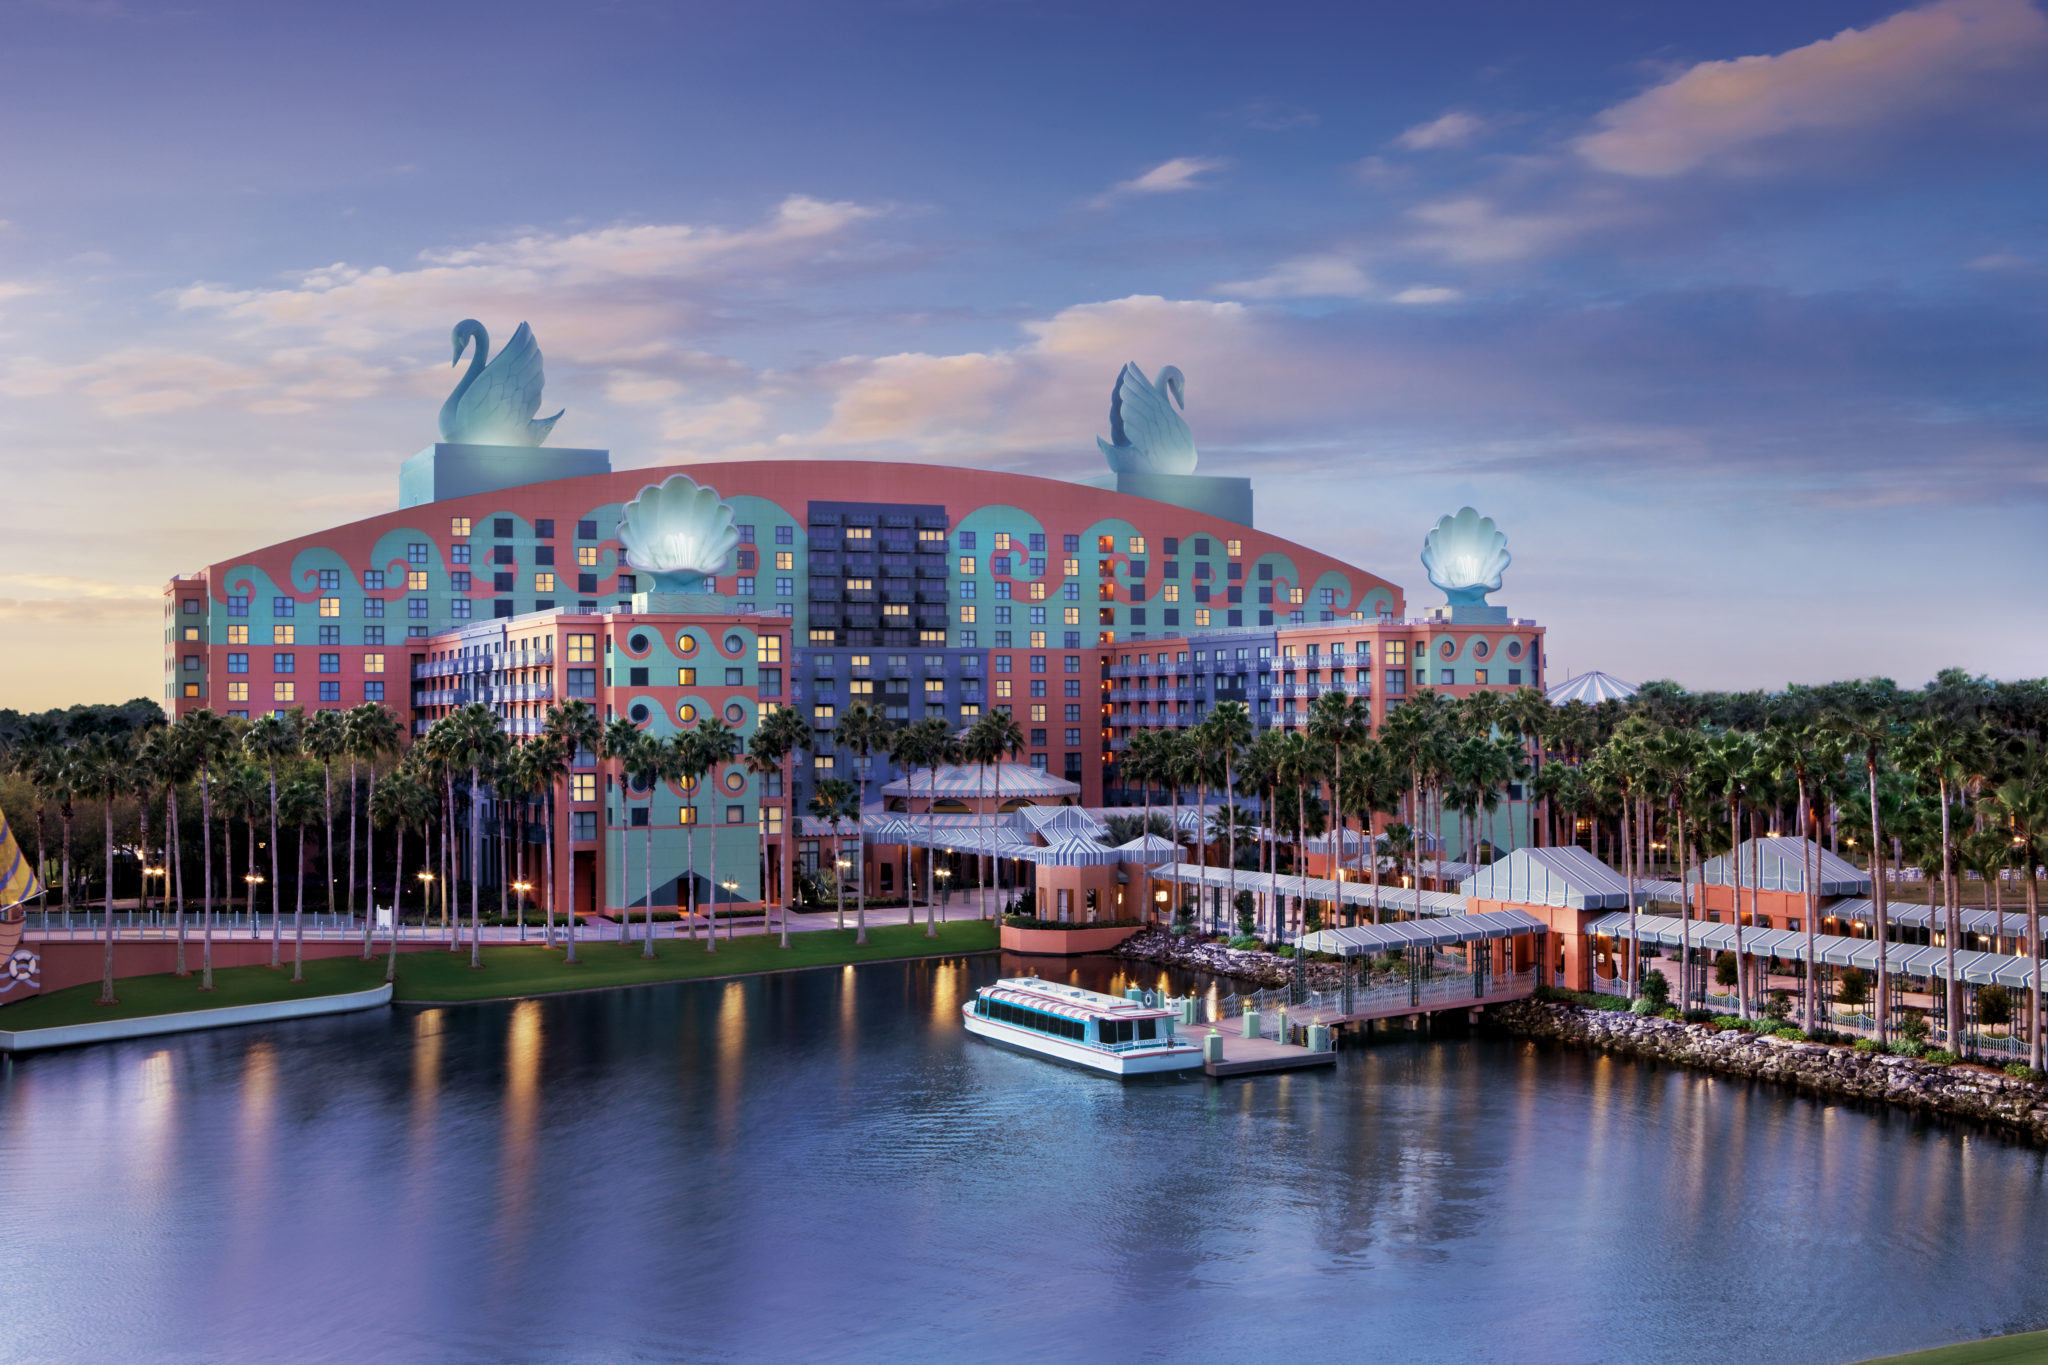 Dates Announced for Walt Disney World Swan and Dolphin Food & Wine Classic